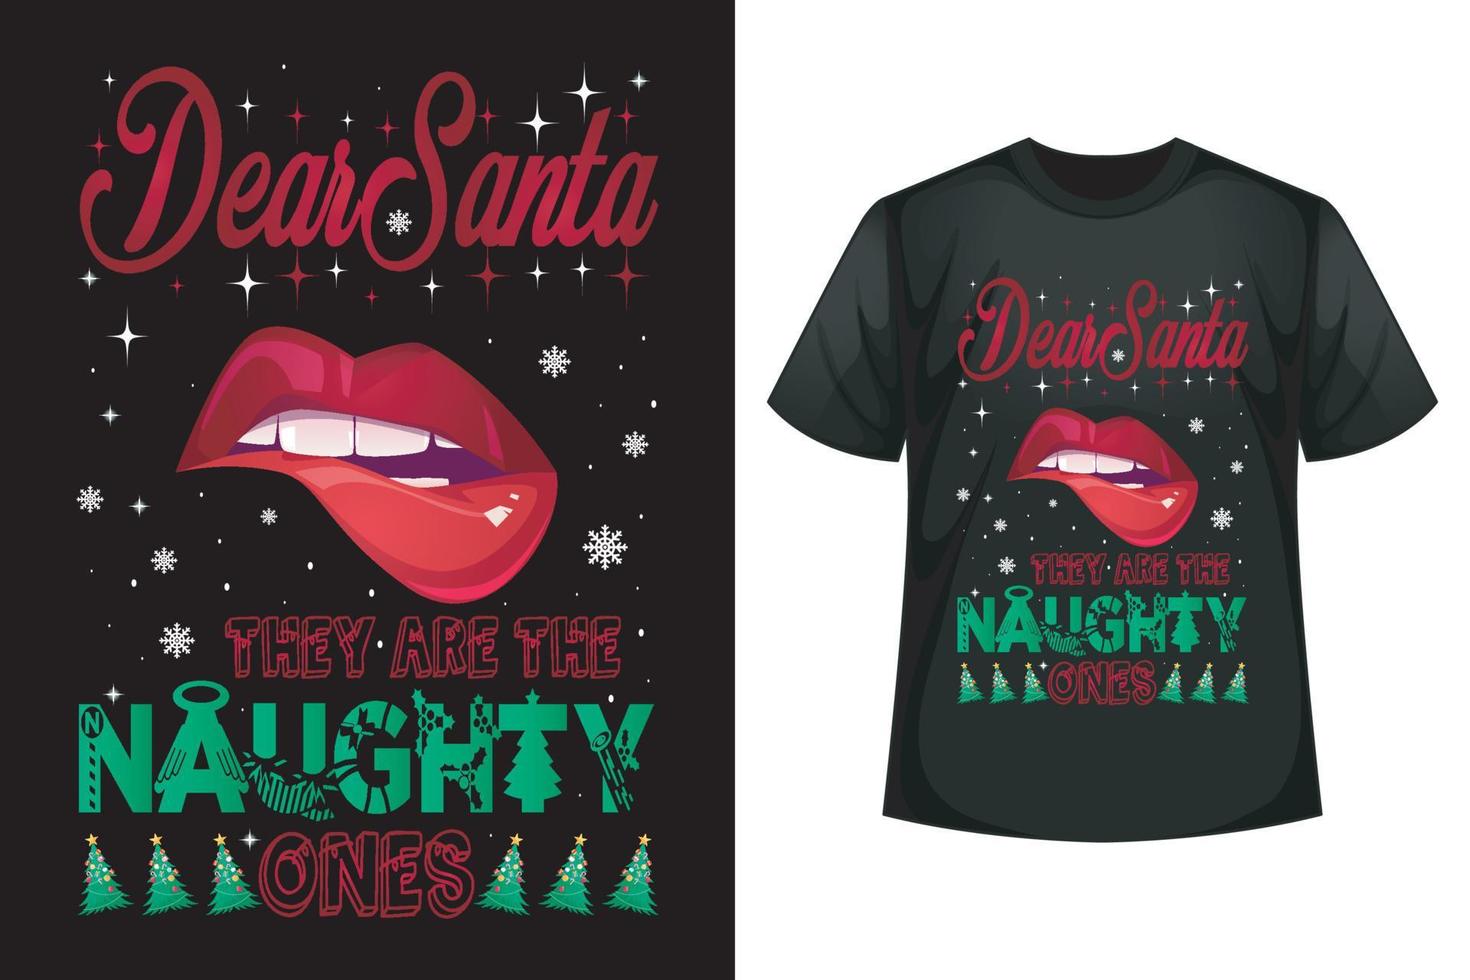 Dear Santa they are the naughty ones - Christmas t-shirt design template vector